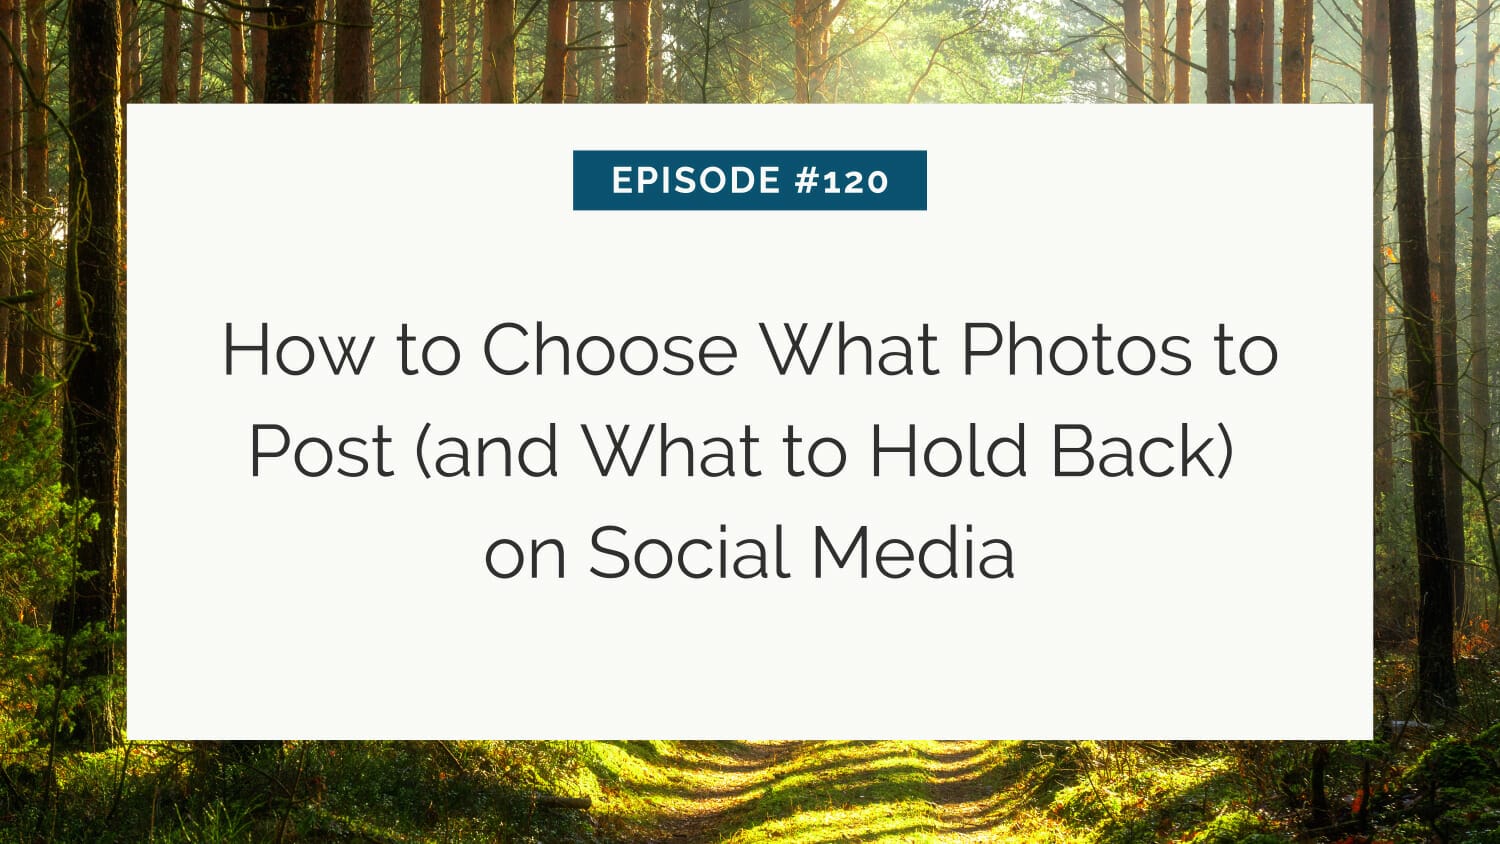 Podcast episode slide on making choices about posting photos on social media, set against a backdrop of a sunlit forest.